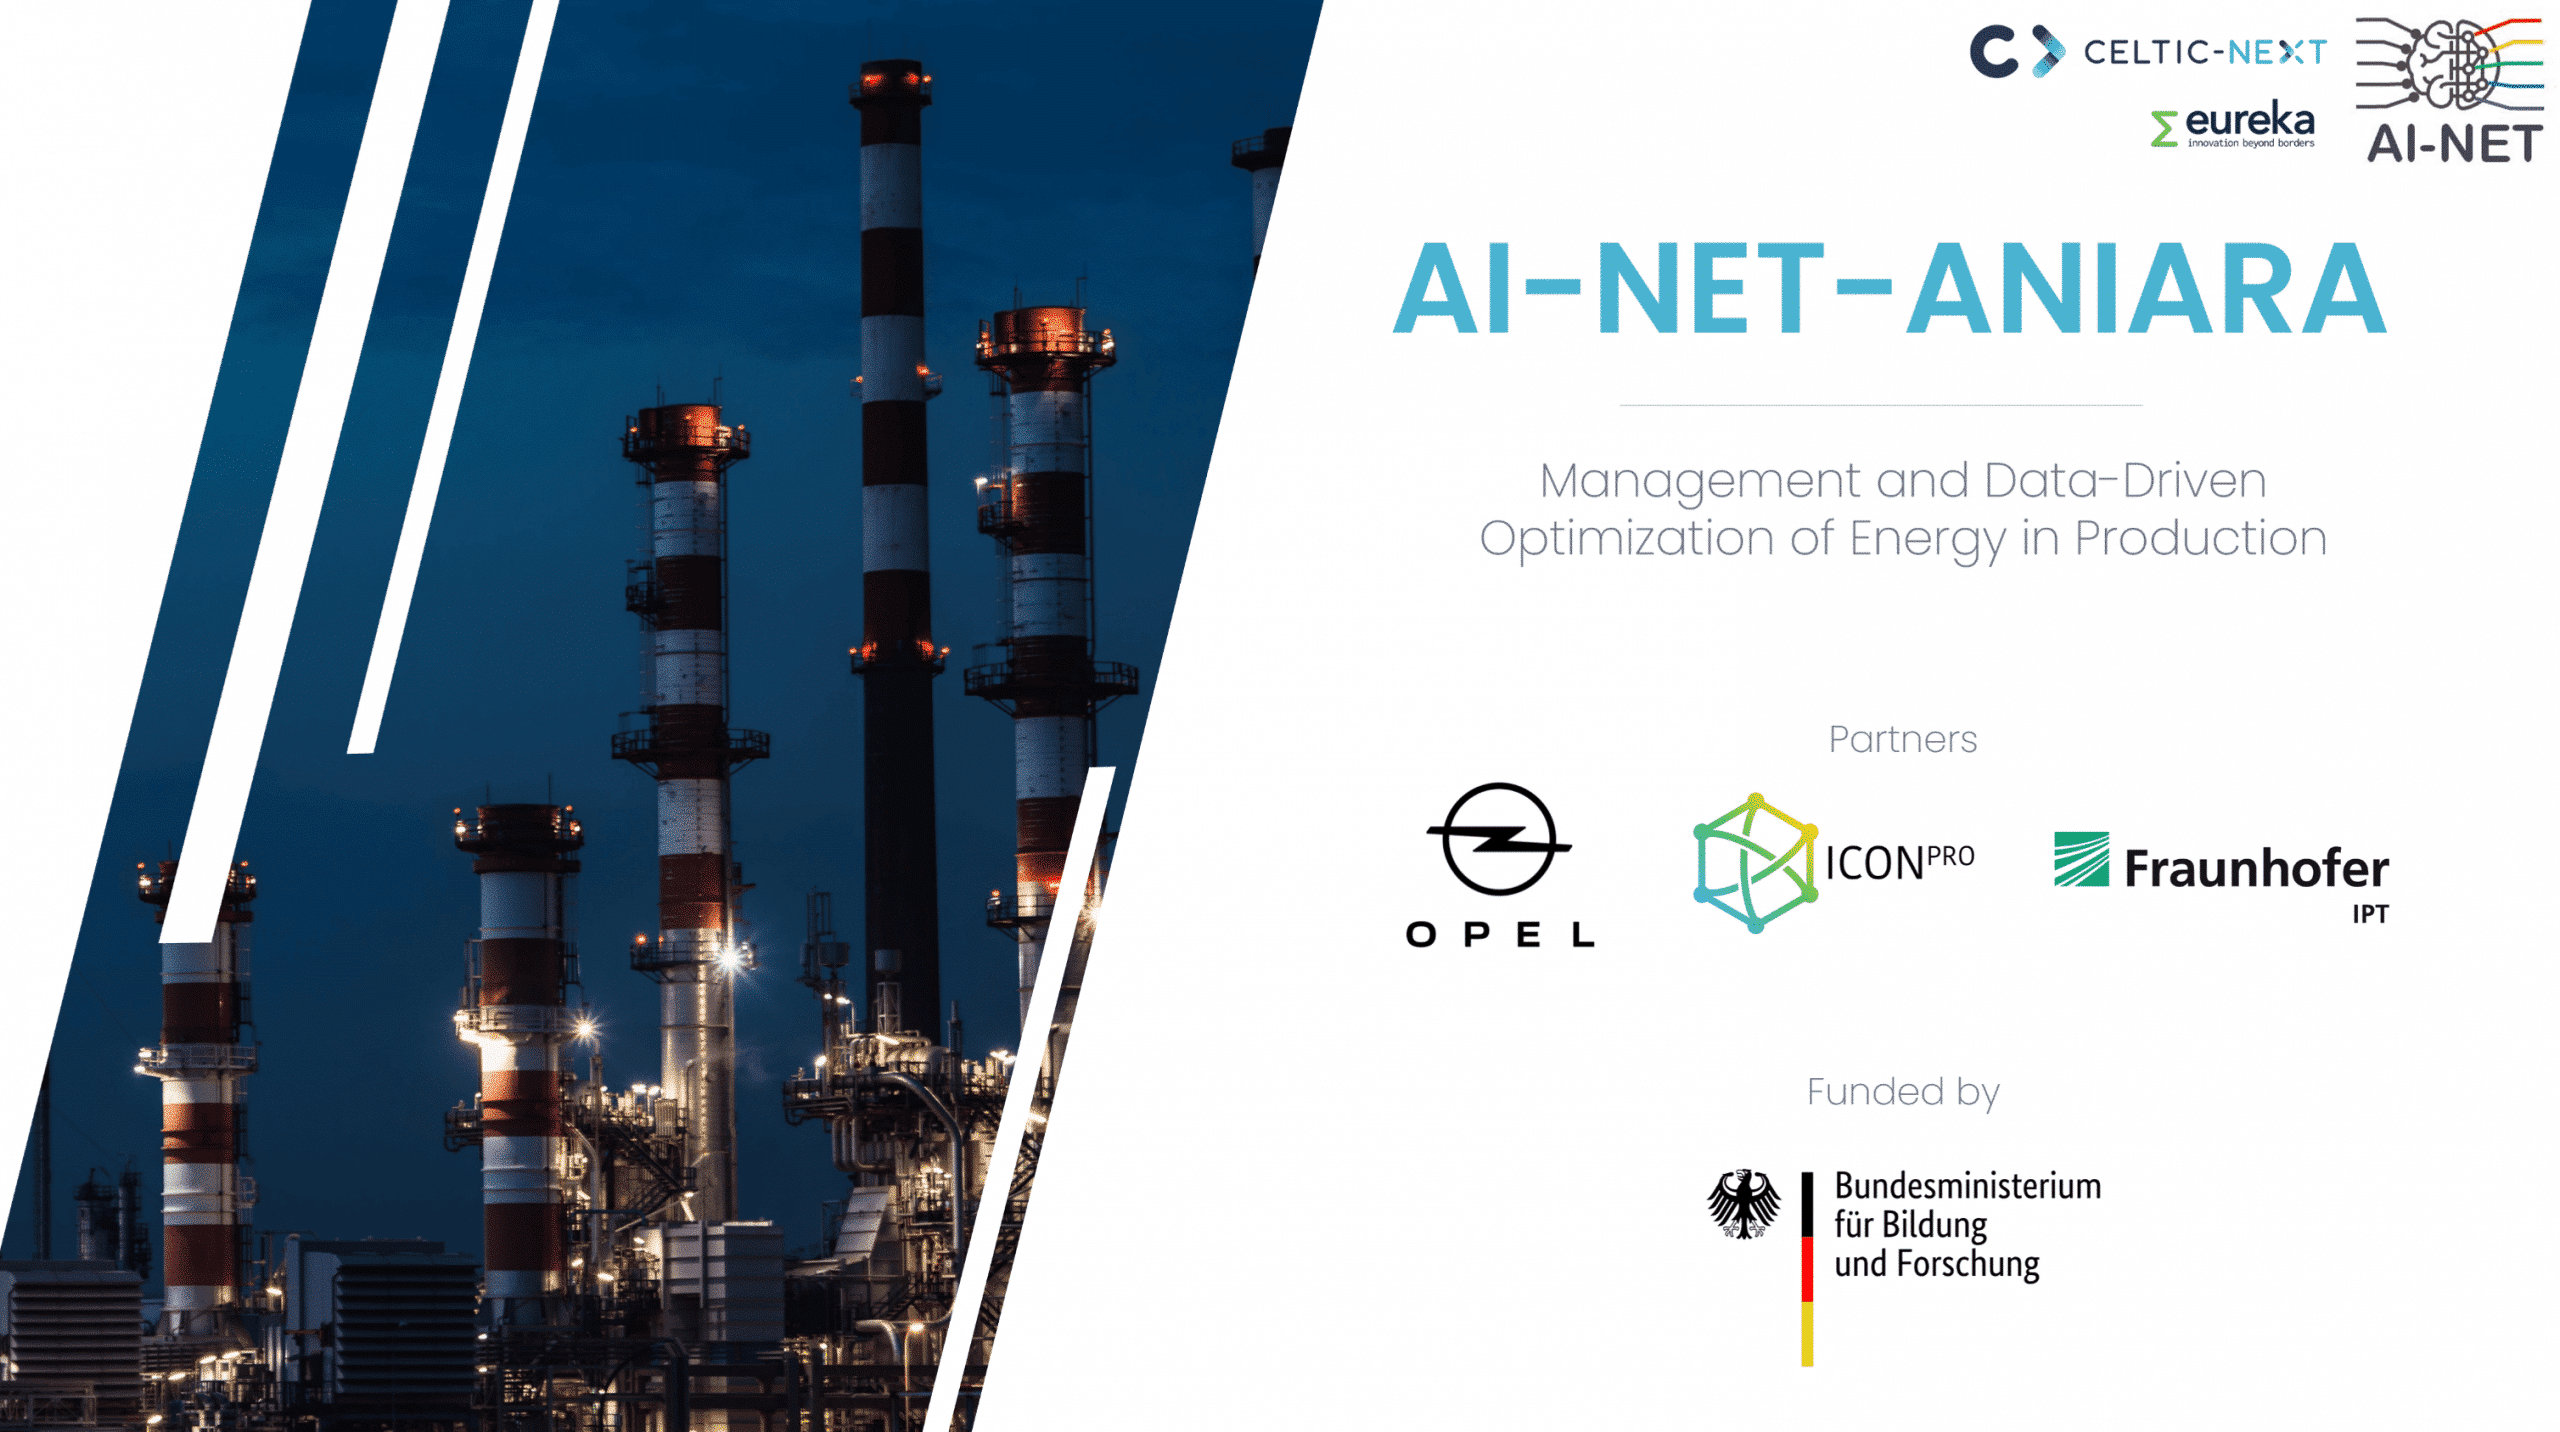 AI-NET-ANIARA Project – Management and data-driven optimization of energy in production.